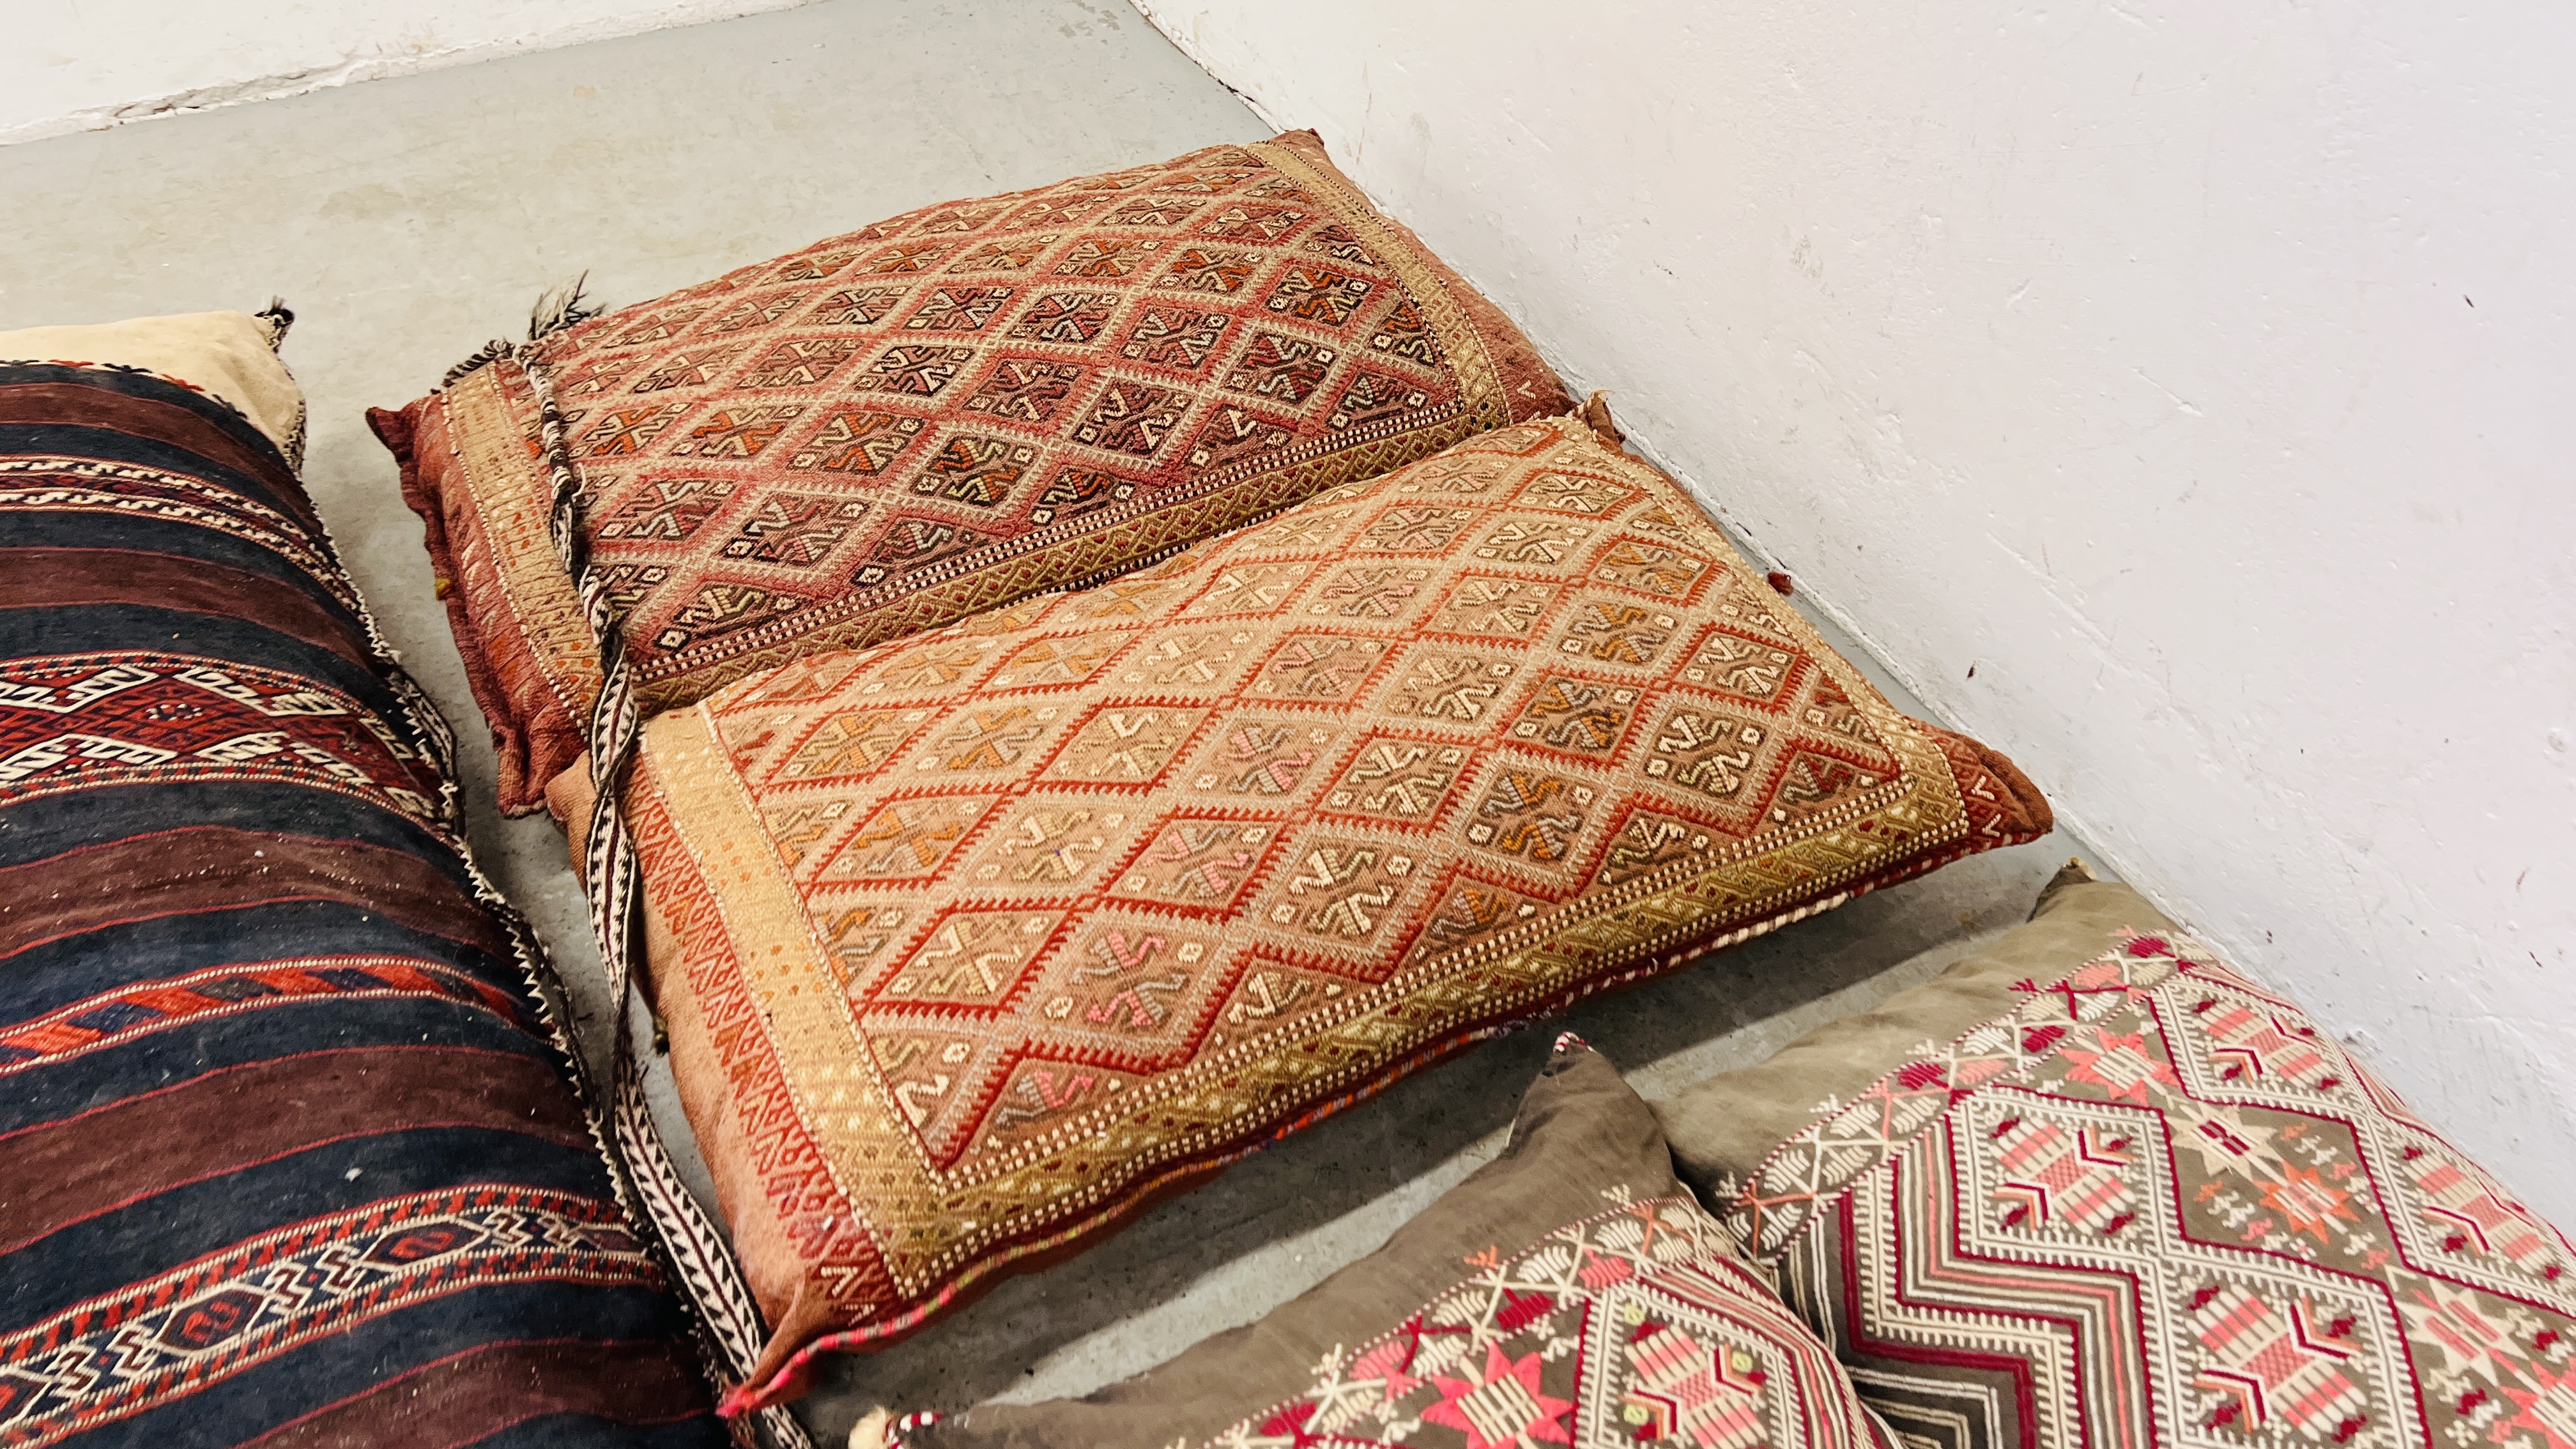 TWO PAIRS OF MIDDLE EASTERN HANDCRAFTS CUSHIONS ALONG WITH A FURTHER LARGER FLAT WEAVE EXAMPLE - Image 4 of 6